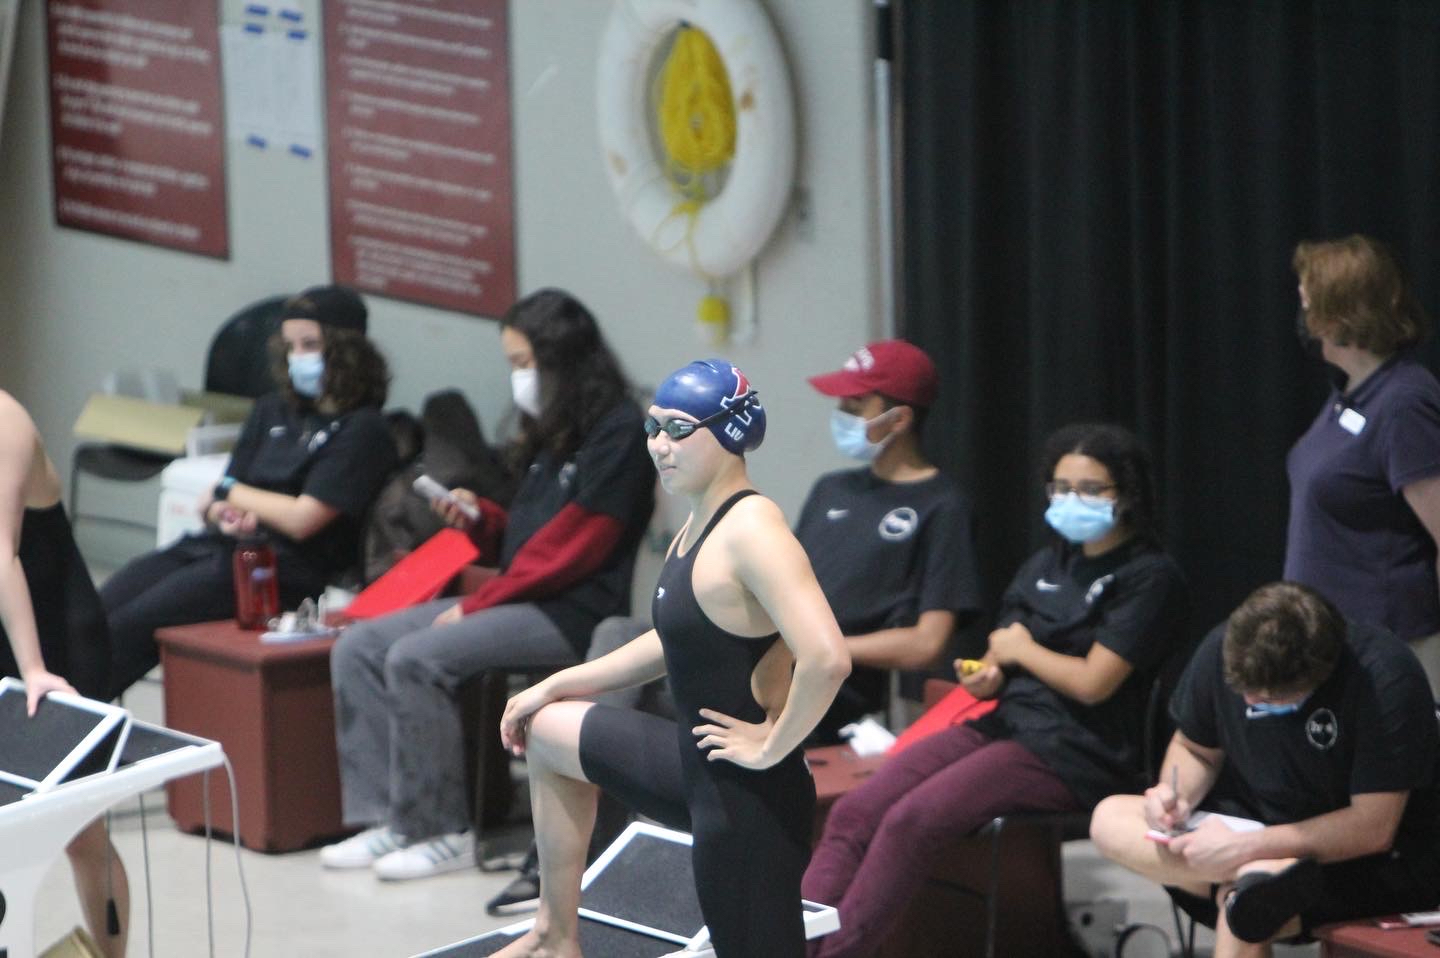 A woman stands with one foot on the starting block before a swim meet. Onlookers are masked behind her.